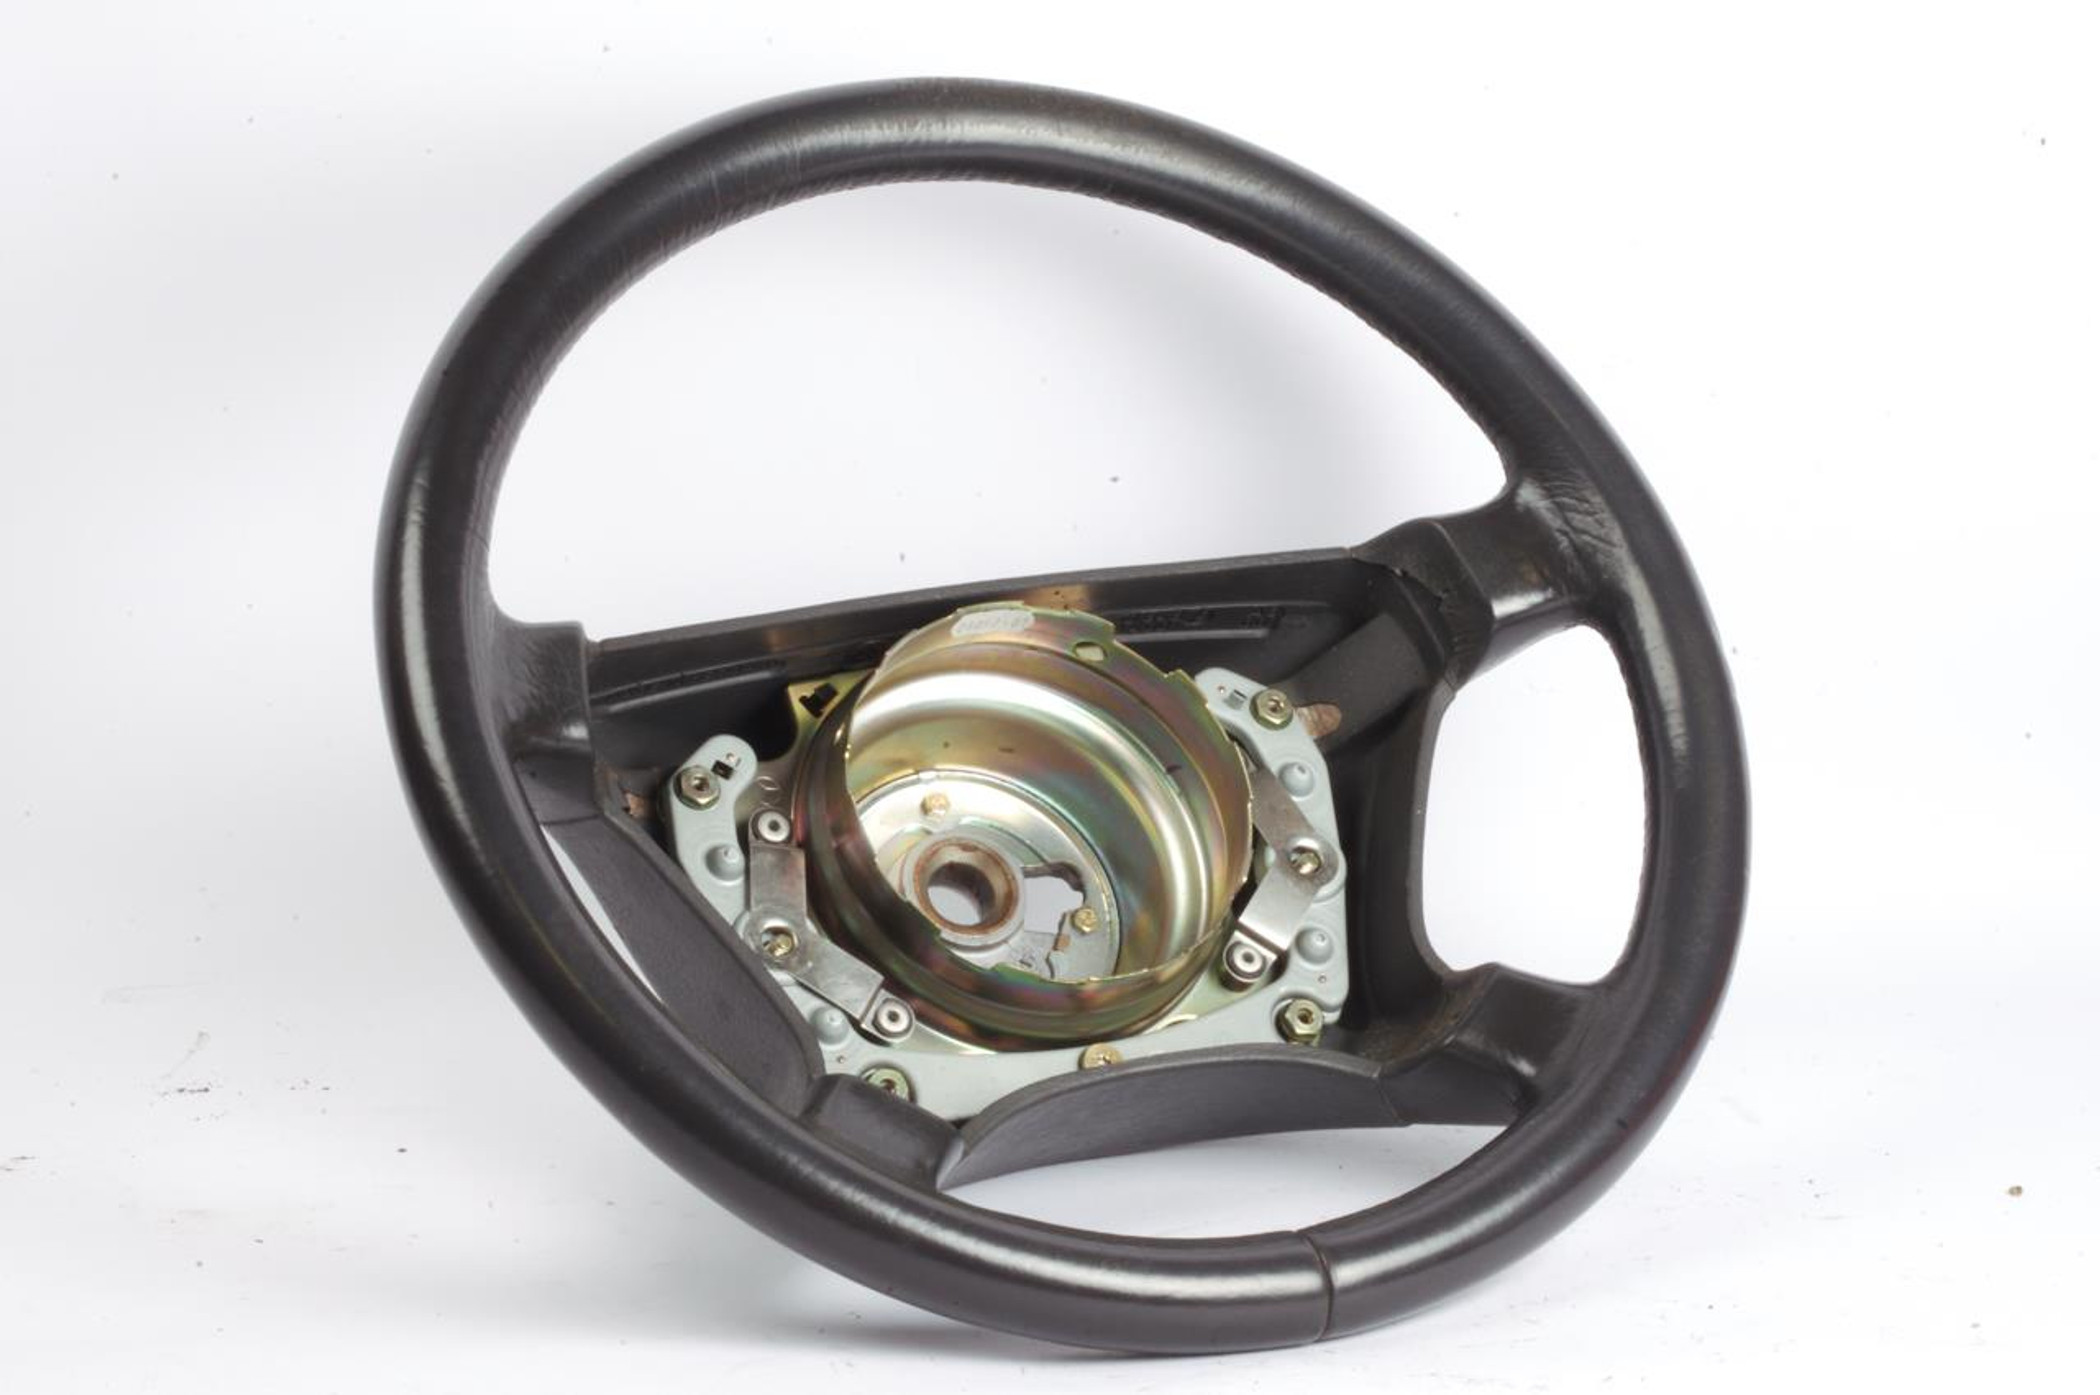 Mercedes Steering Wheel Complete (F) - Brown Leather | R129 SL W140 S Facelift